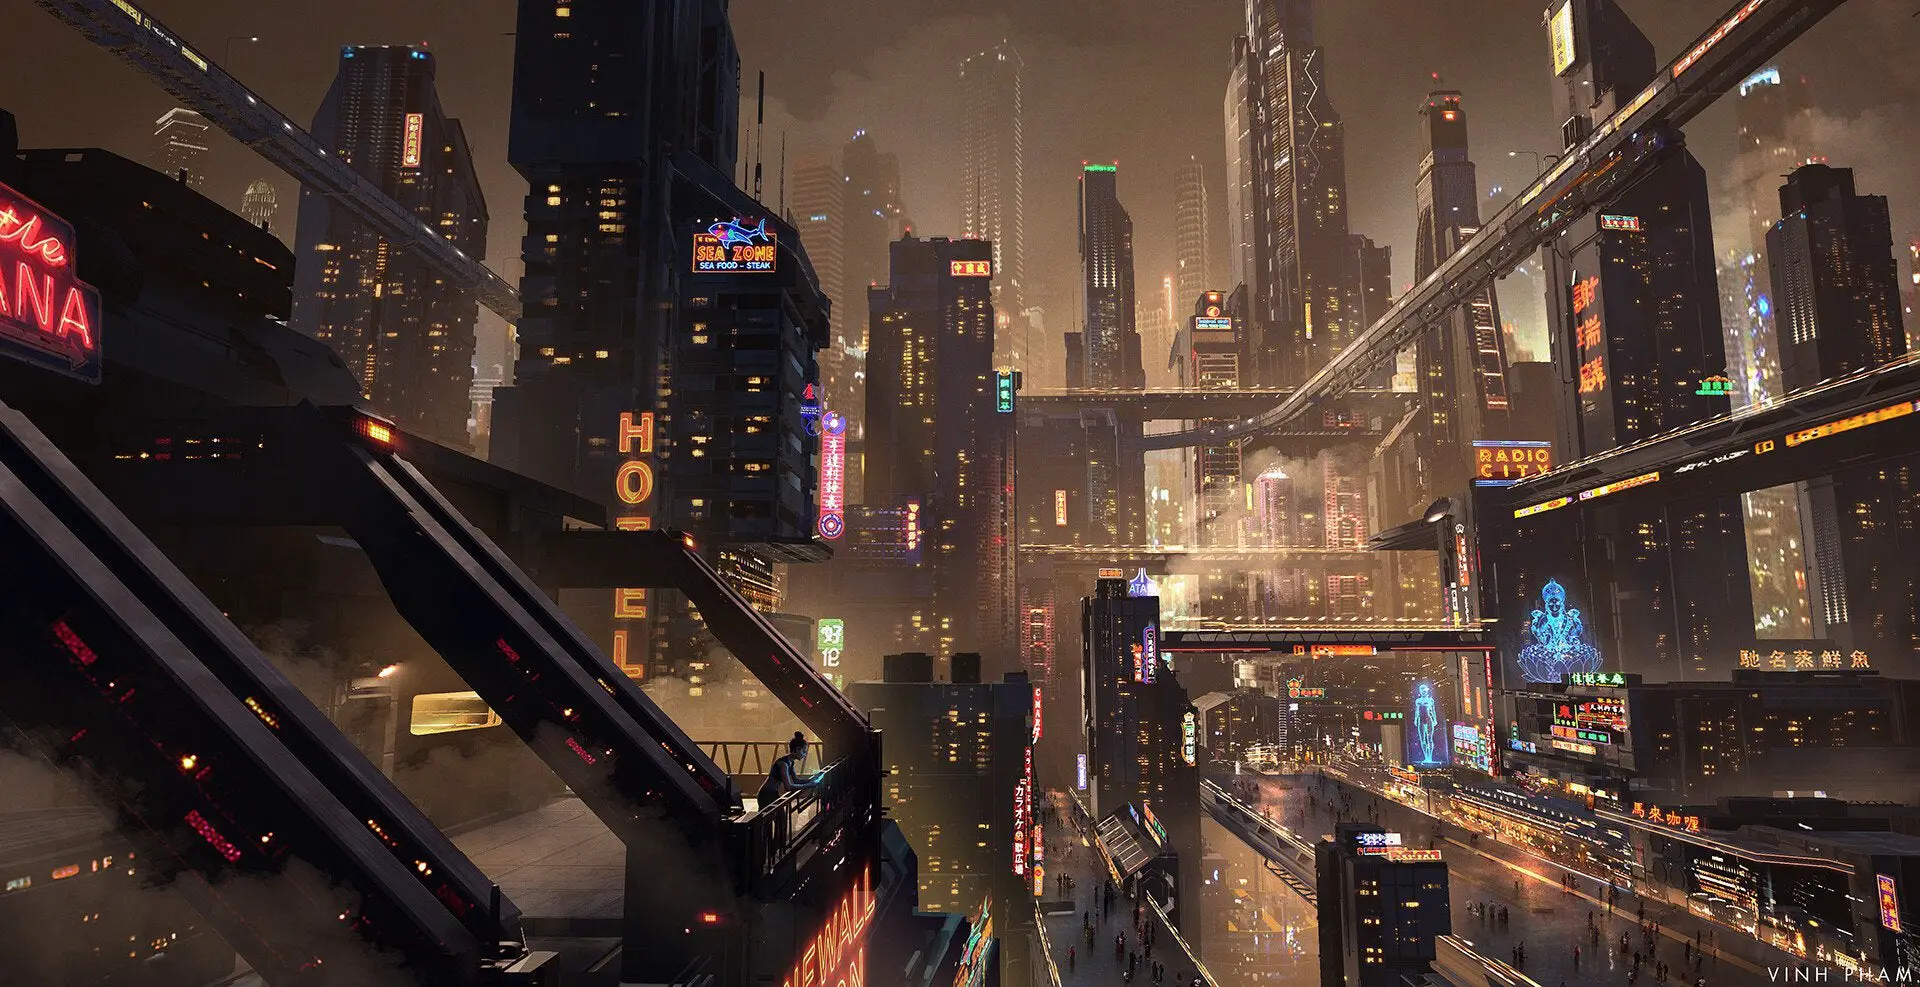 A futuristic city at night with neon lights and towering buildings. - Cyberpunk